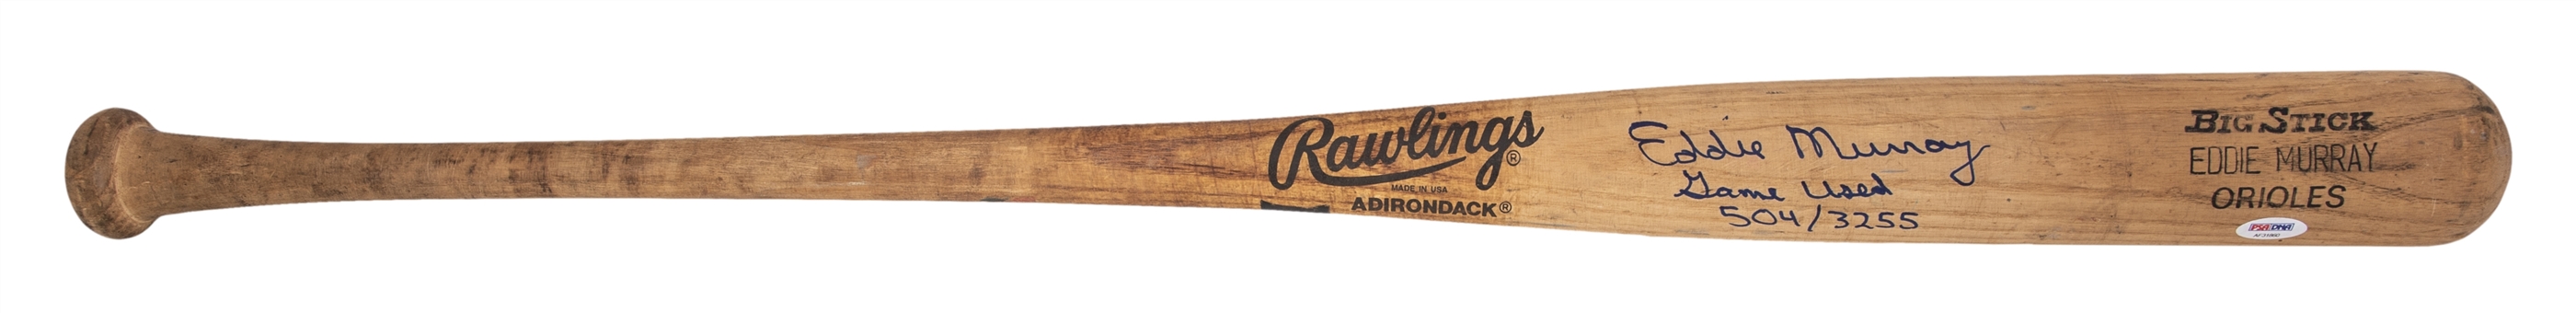 1996 Eddie Murray Game Used and Signed Rawlings Adirondack 456A Model Bat with "Game Used, 504/3255" Inscription (PSA/DNA GU 10)